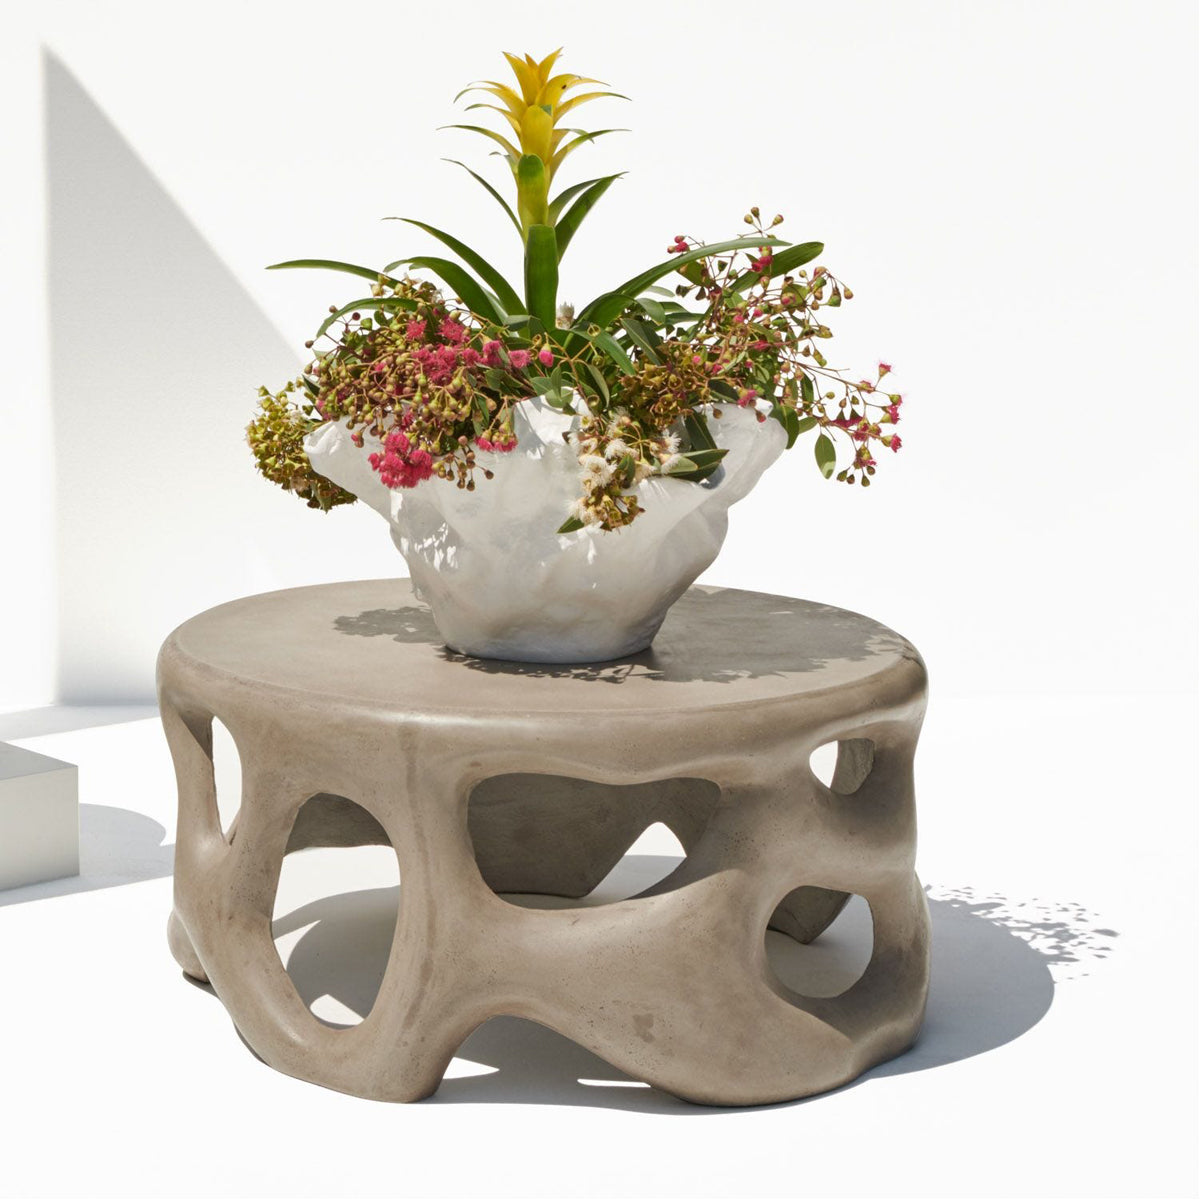 Made Goods Hyde Sculptural Concrete Outdoor Coffee Table